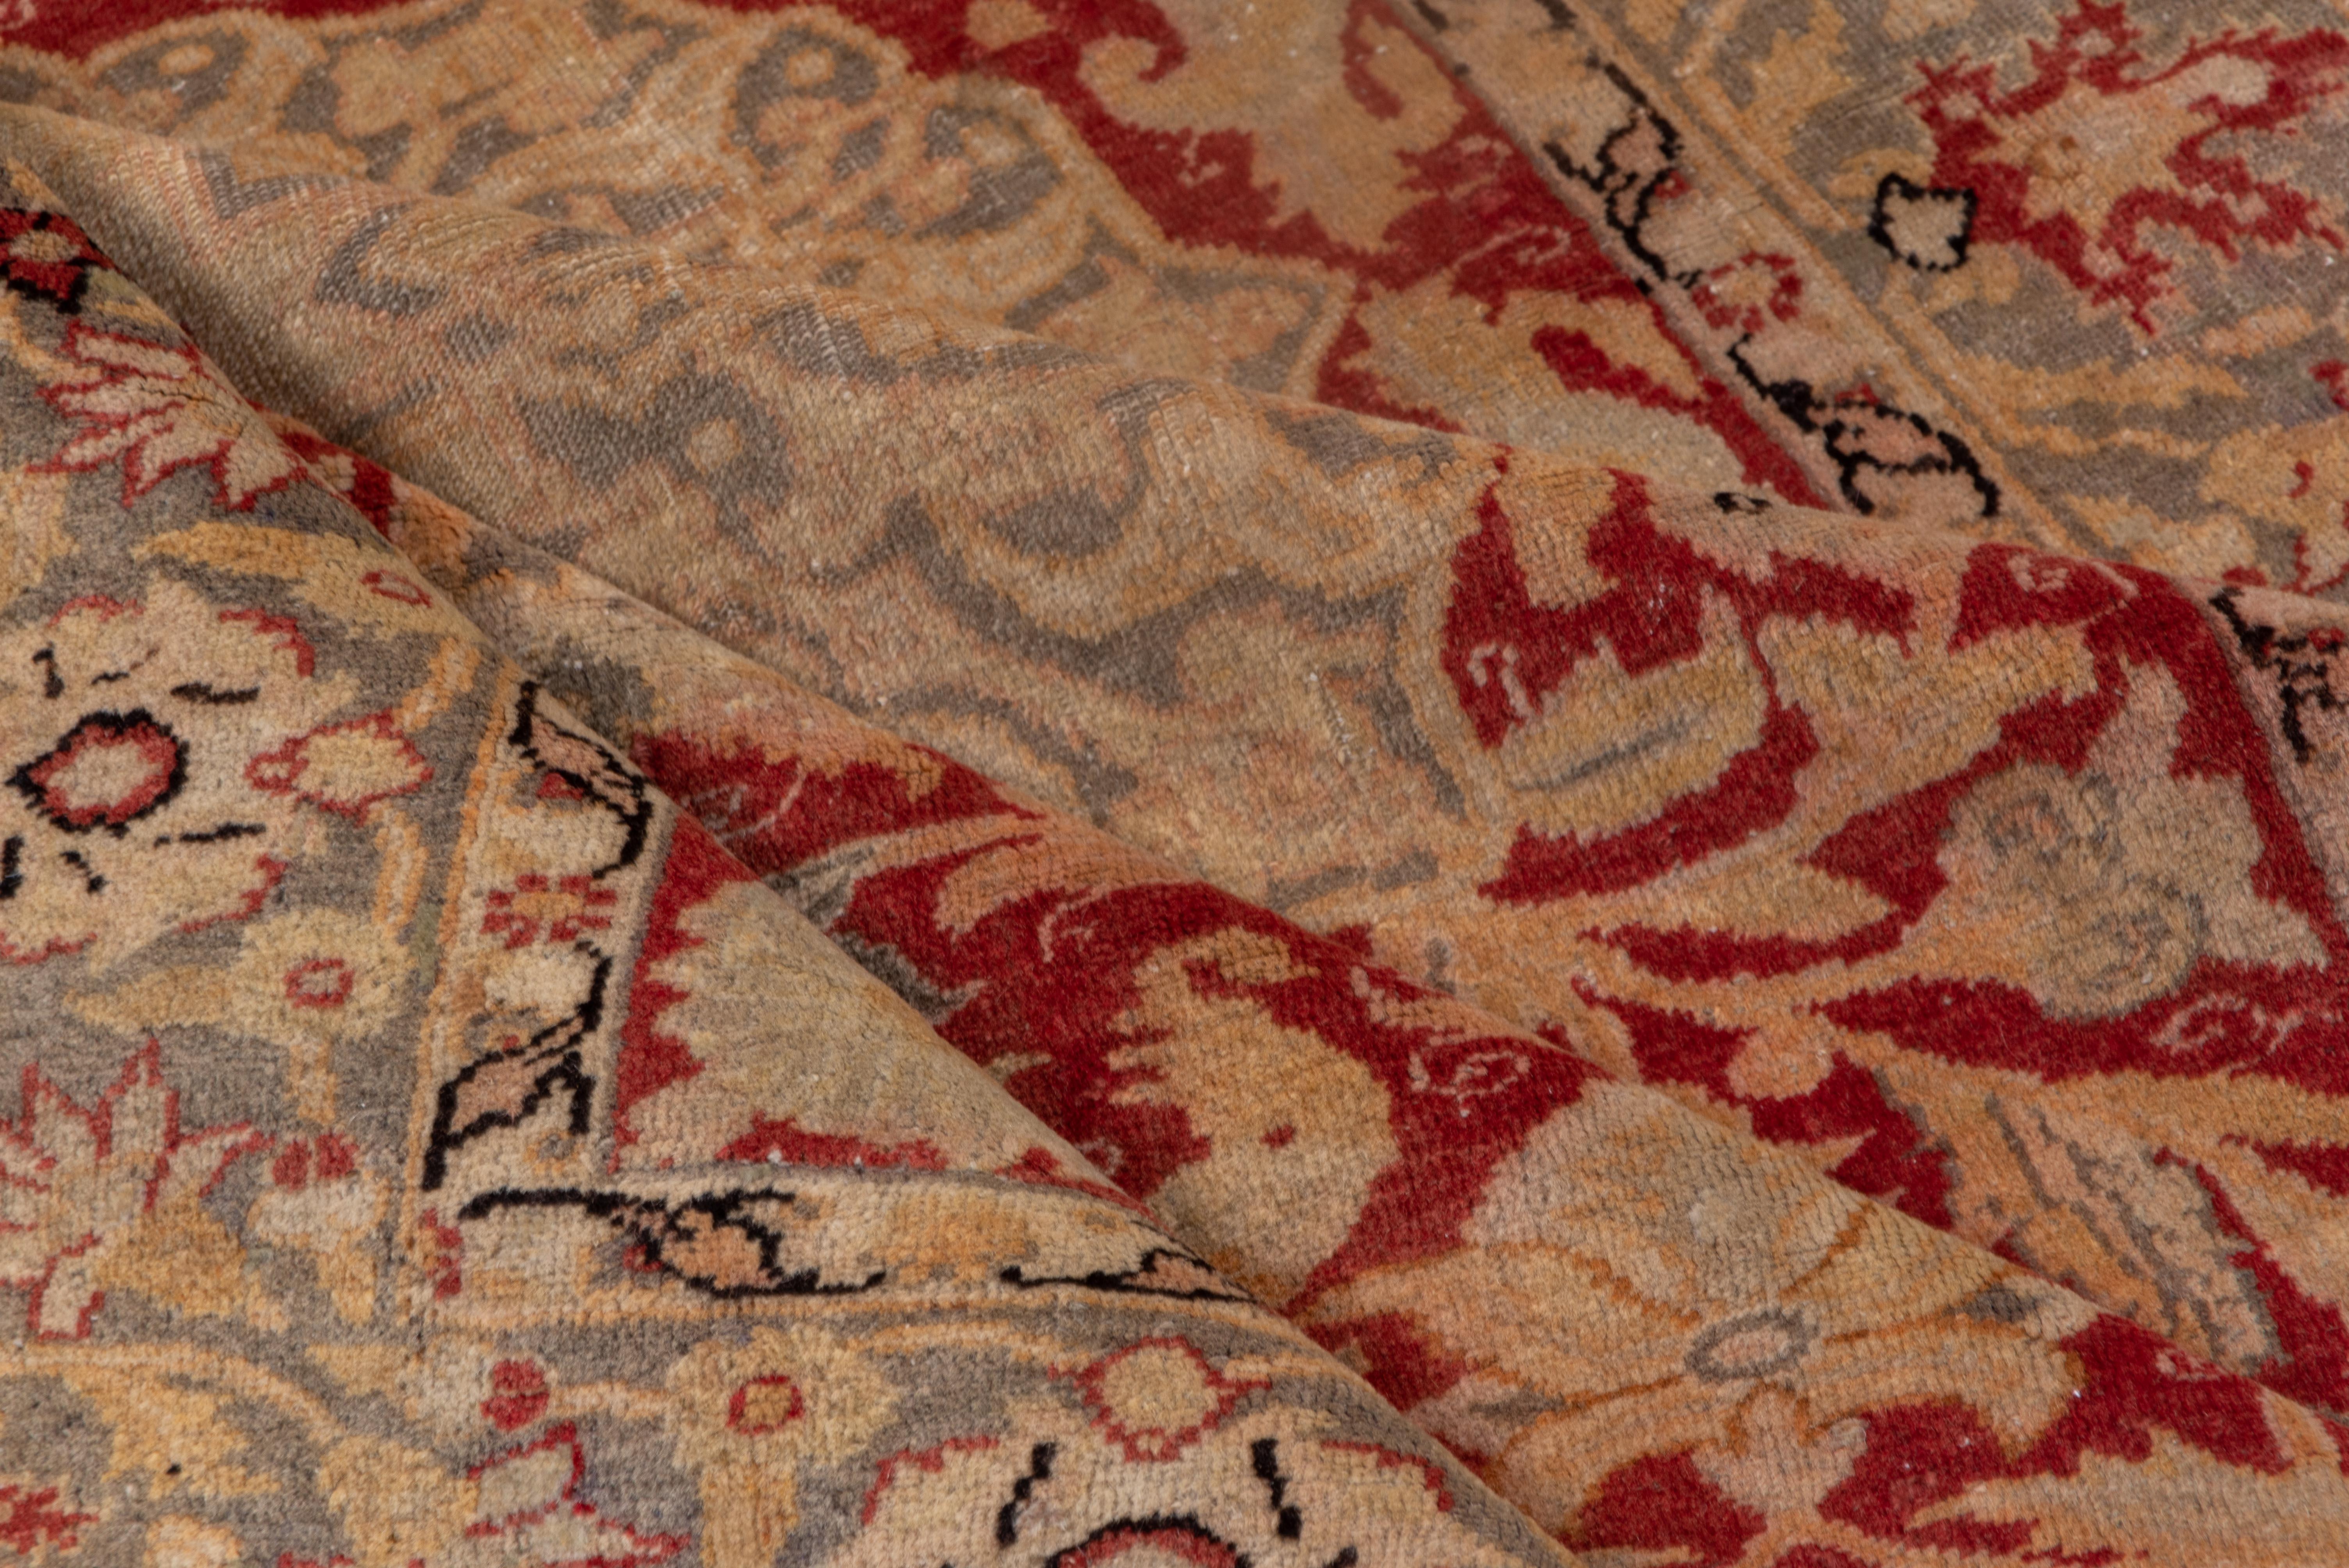 Royal Red and Egyptian Sand Tan, Center Medallion 1930s Antique Kaisary Rug In Good Condition For Sale In New York, NY